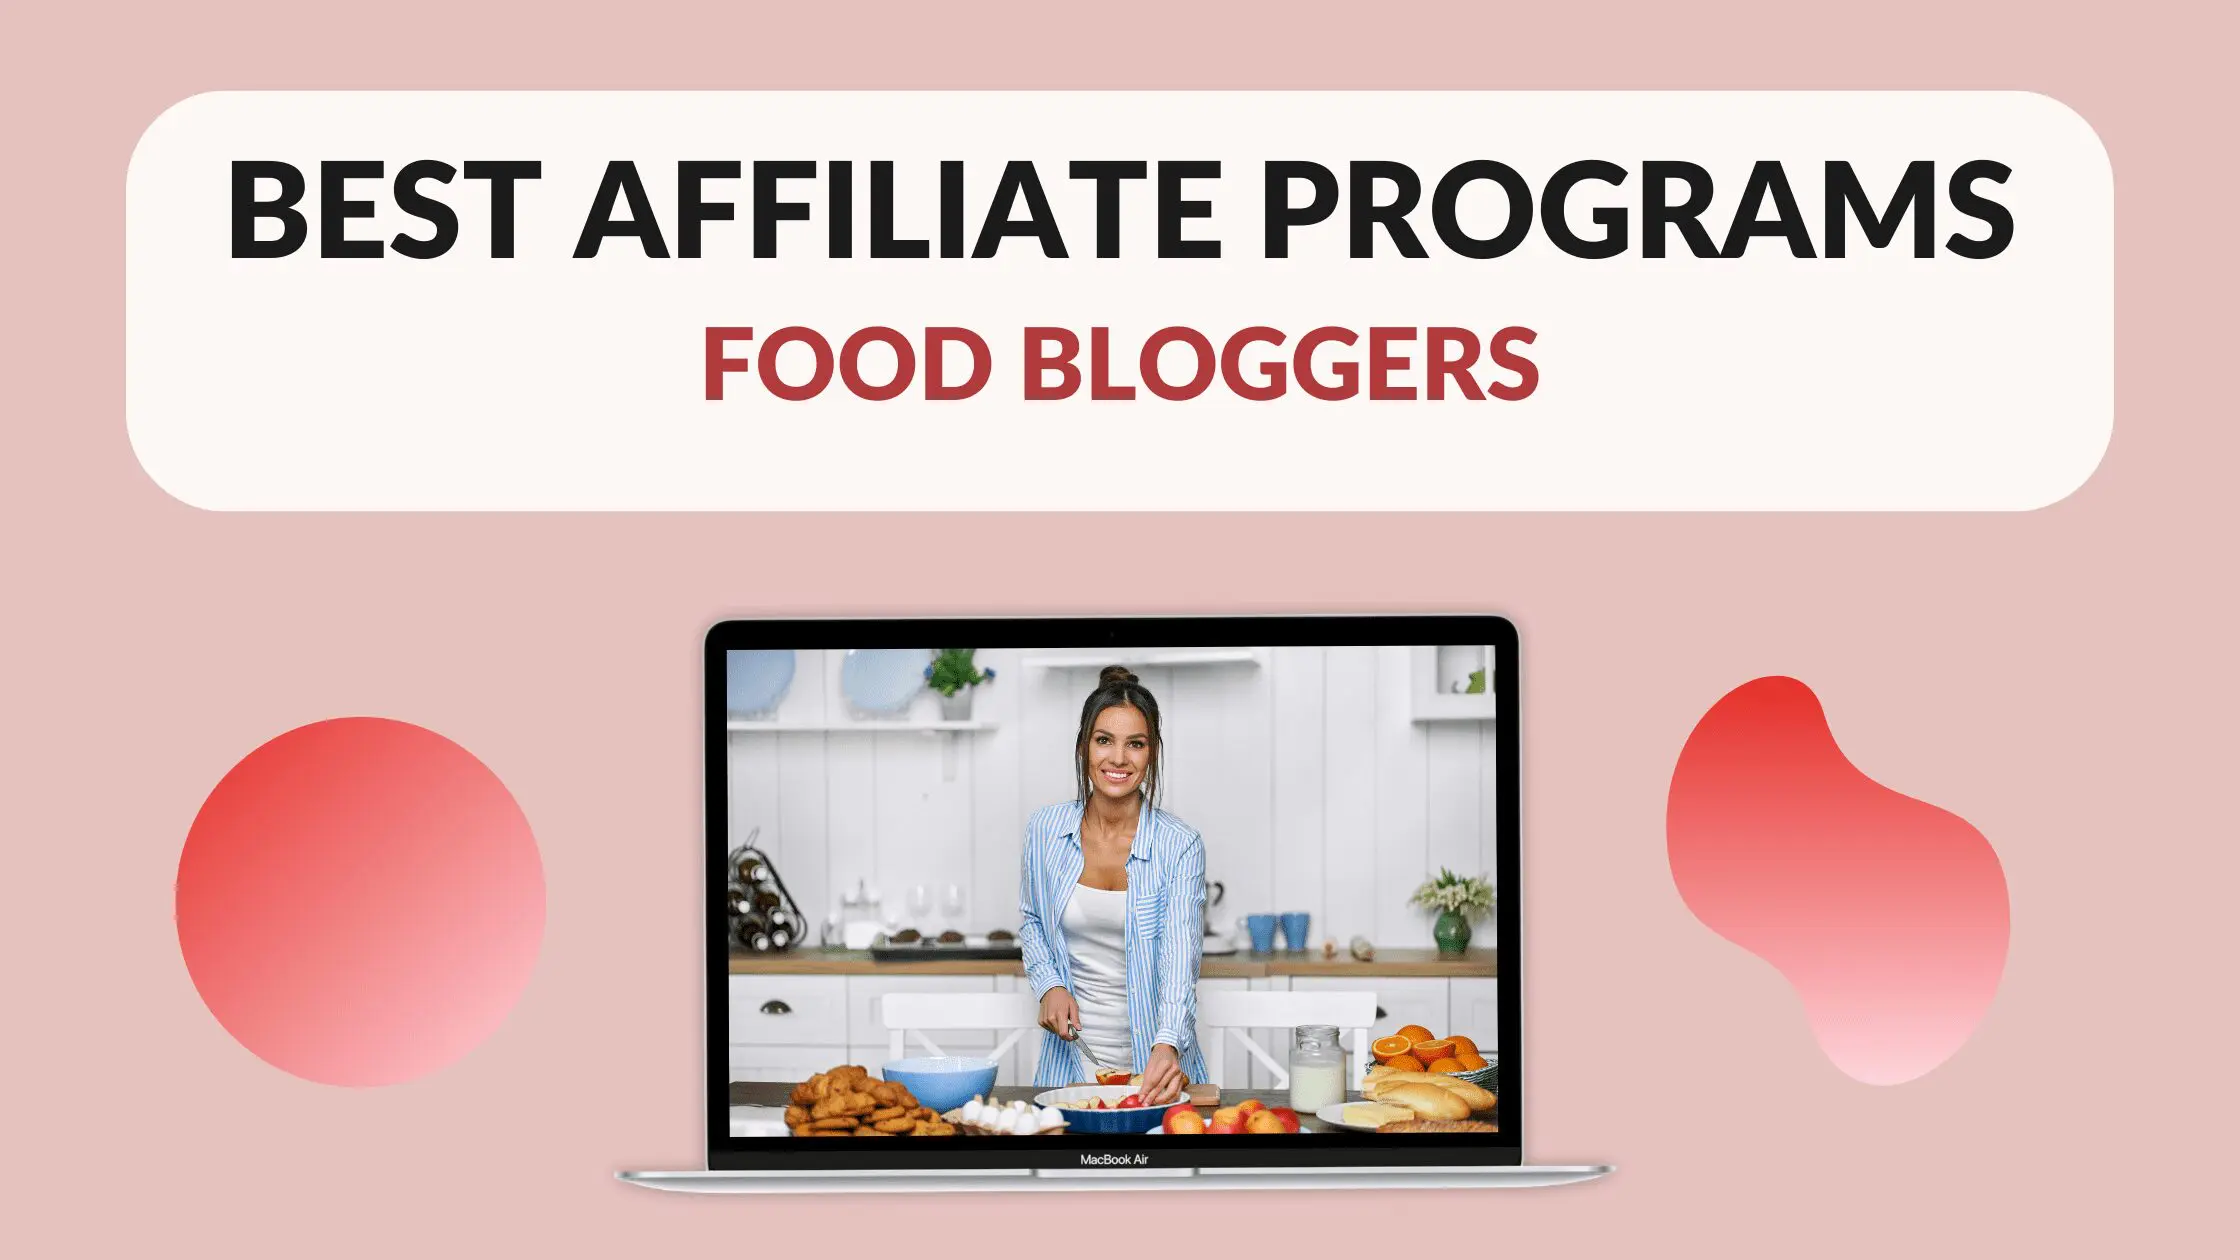 Food Blogging and Affiliate Marketing: How to Make Money with Affiliate Programs